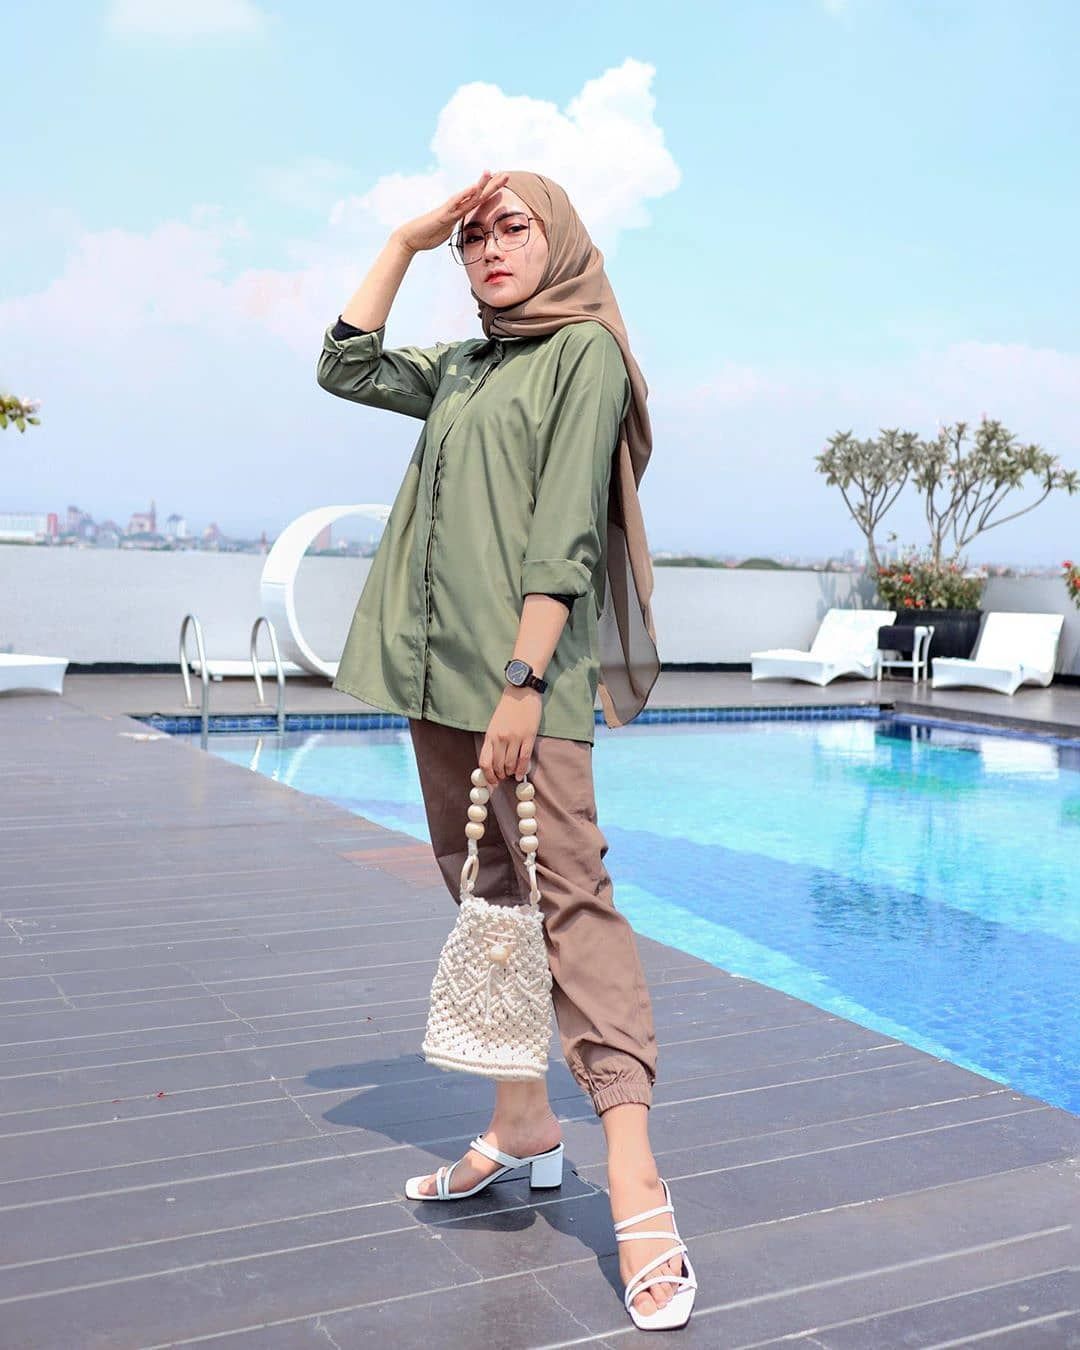 Trend Hijab Style OOTD 2020 on Instagram: “Inspiration Hijab Style Outfit of The Day (OOTD) 2020 Remaja Indonesia Positif, Kreatif & Ceria ????? . . . #repost by @lupitadewief…” - Trend Hijab Style OOTD 2020 on Instagram: “Inspiration Hijab Style Outfit of The Day (OOTD) 2020 Remaja Indonesia Positif, Kreatif & Ceria ????? . . . #repost by @lupitadewief…” -   13 style Simple indonesia ideas